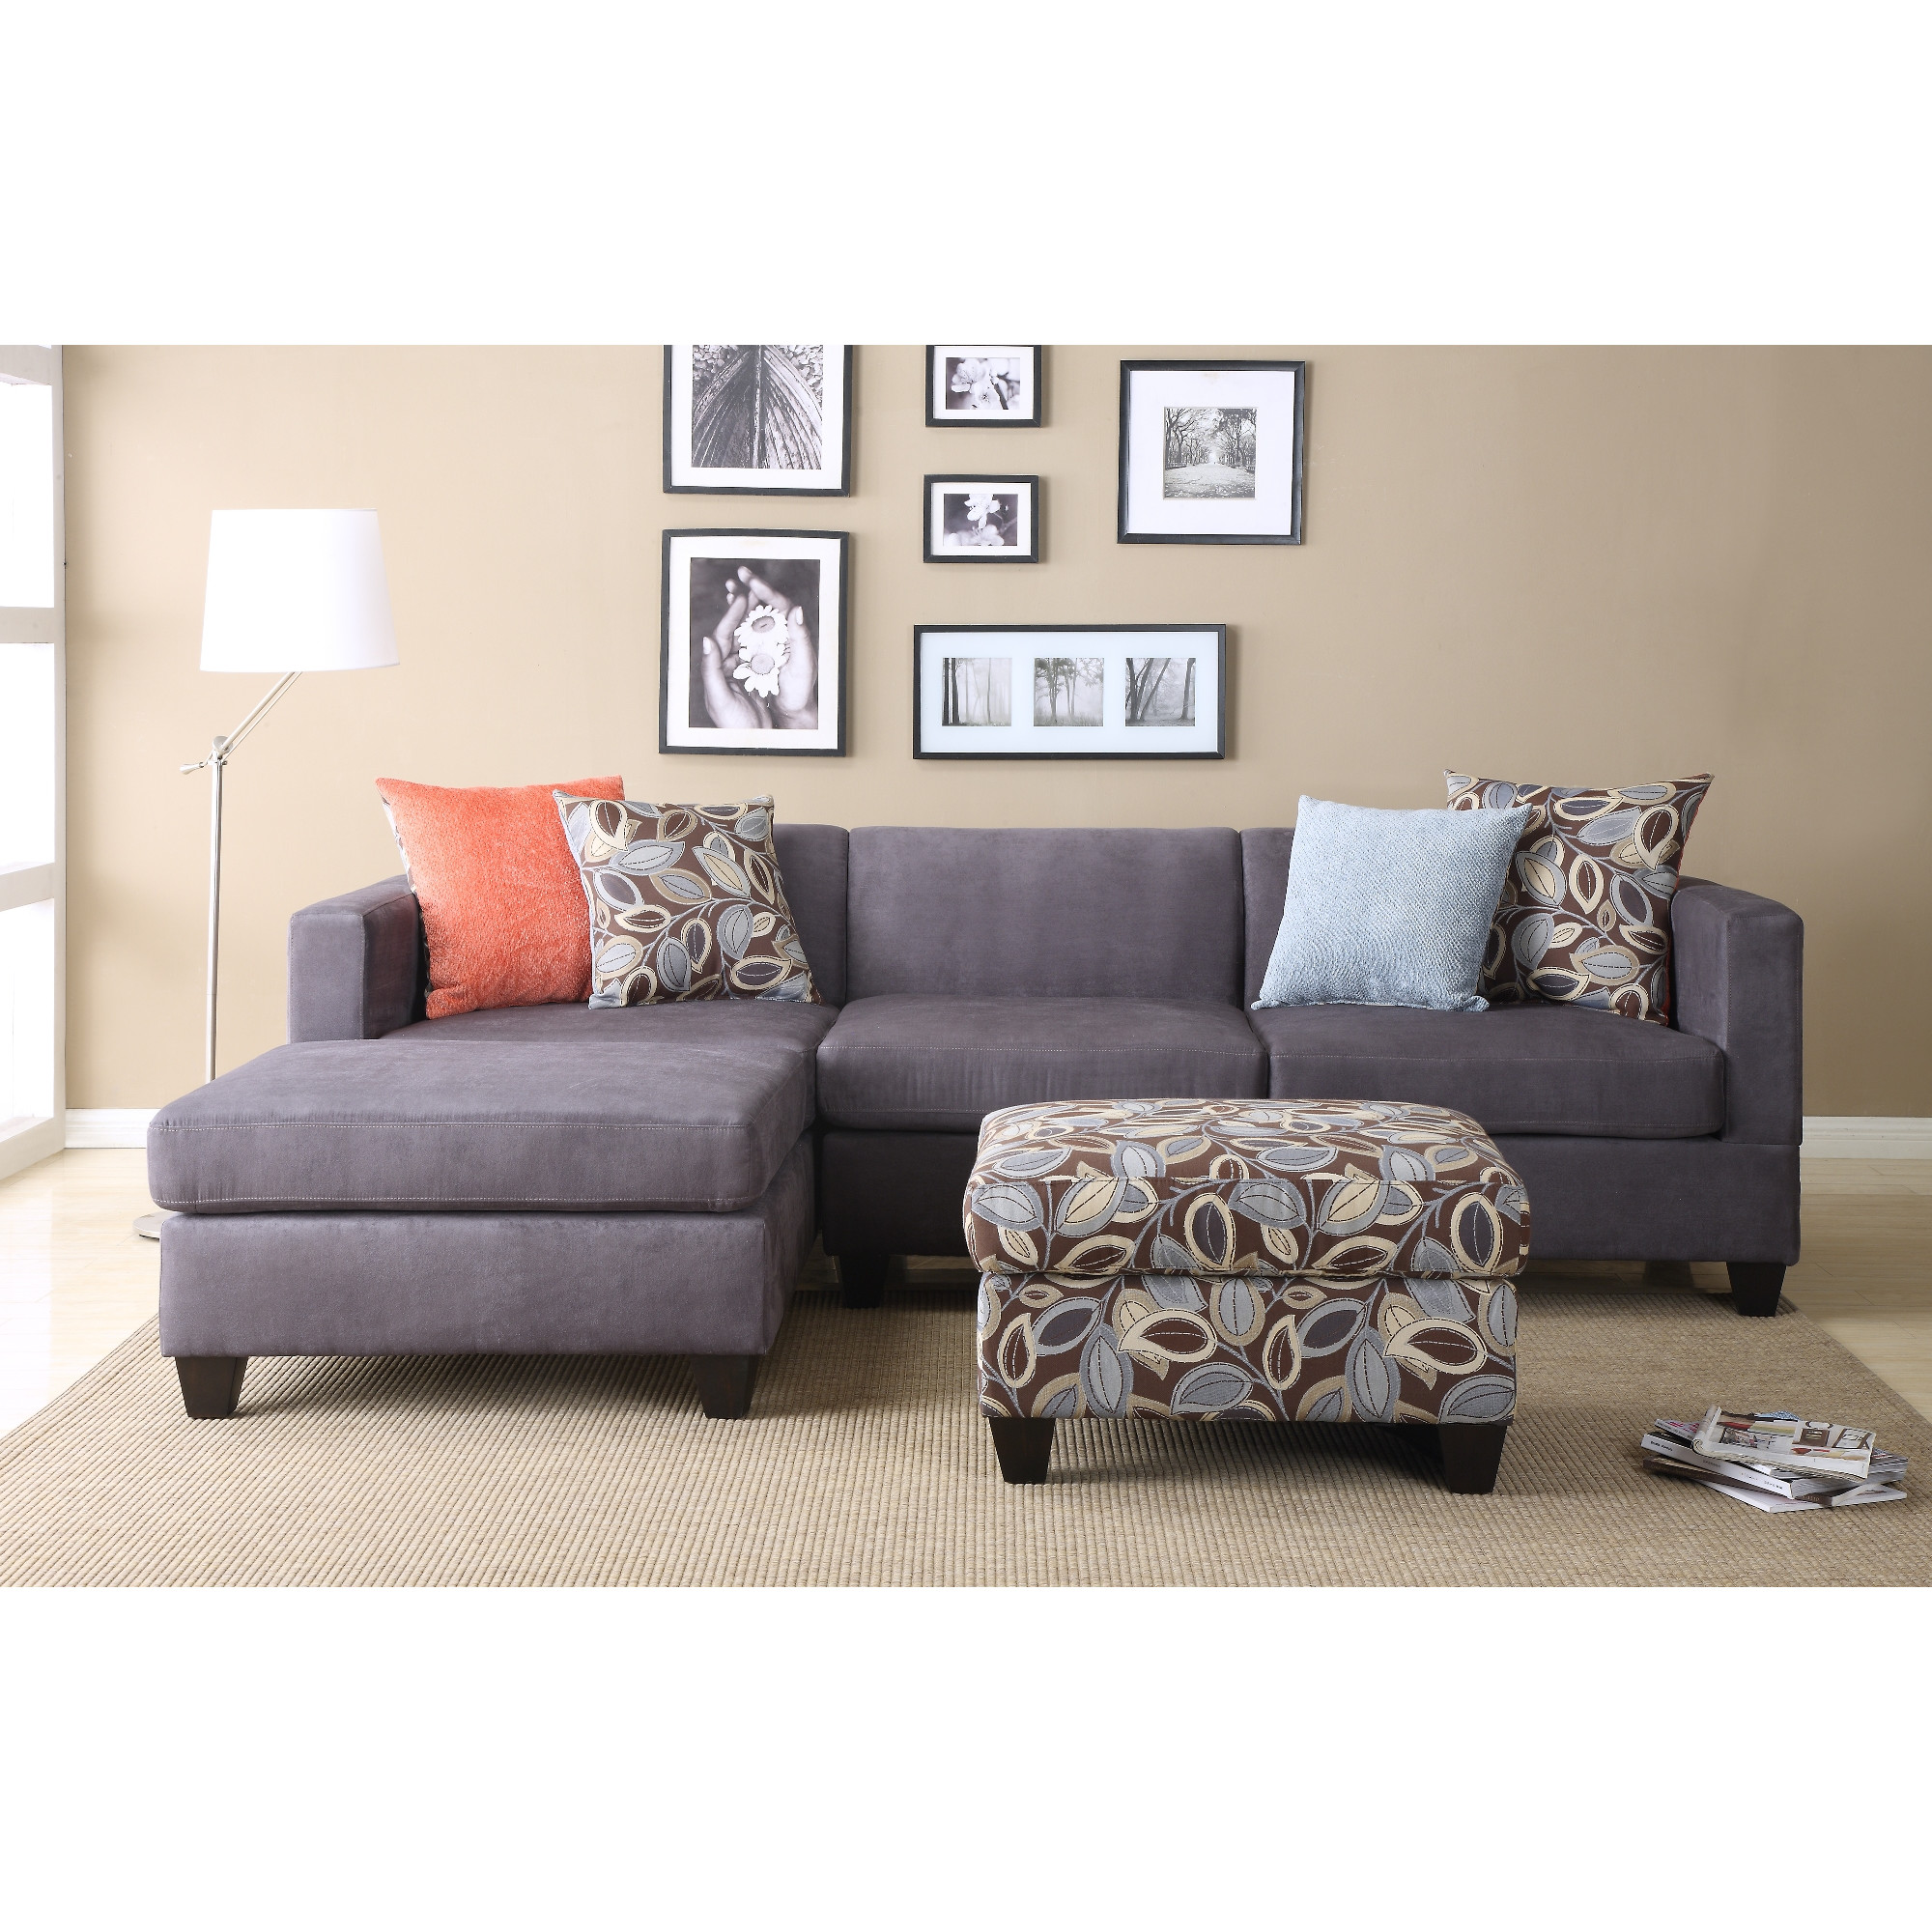 Chic QUICK VIEW. Ashtyn Reversible Chaise Sectional microfiber sectional sofa